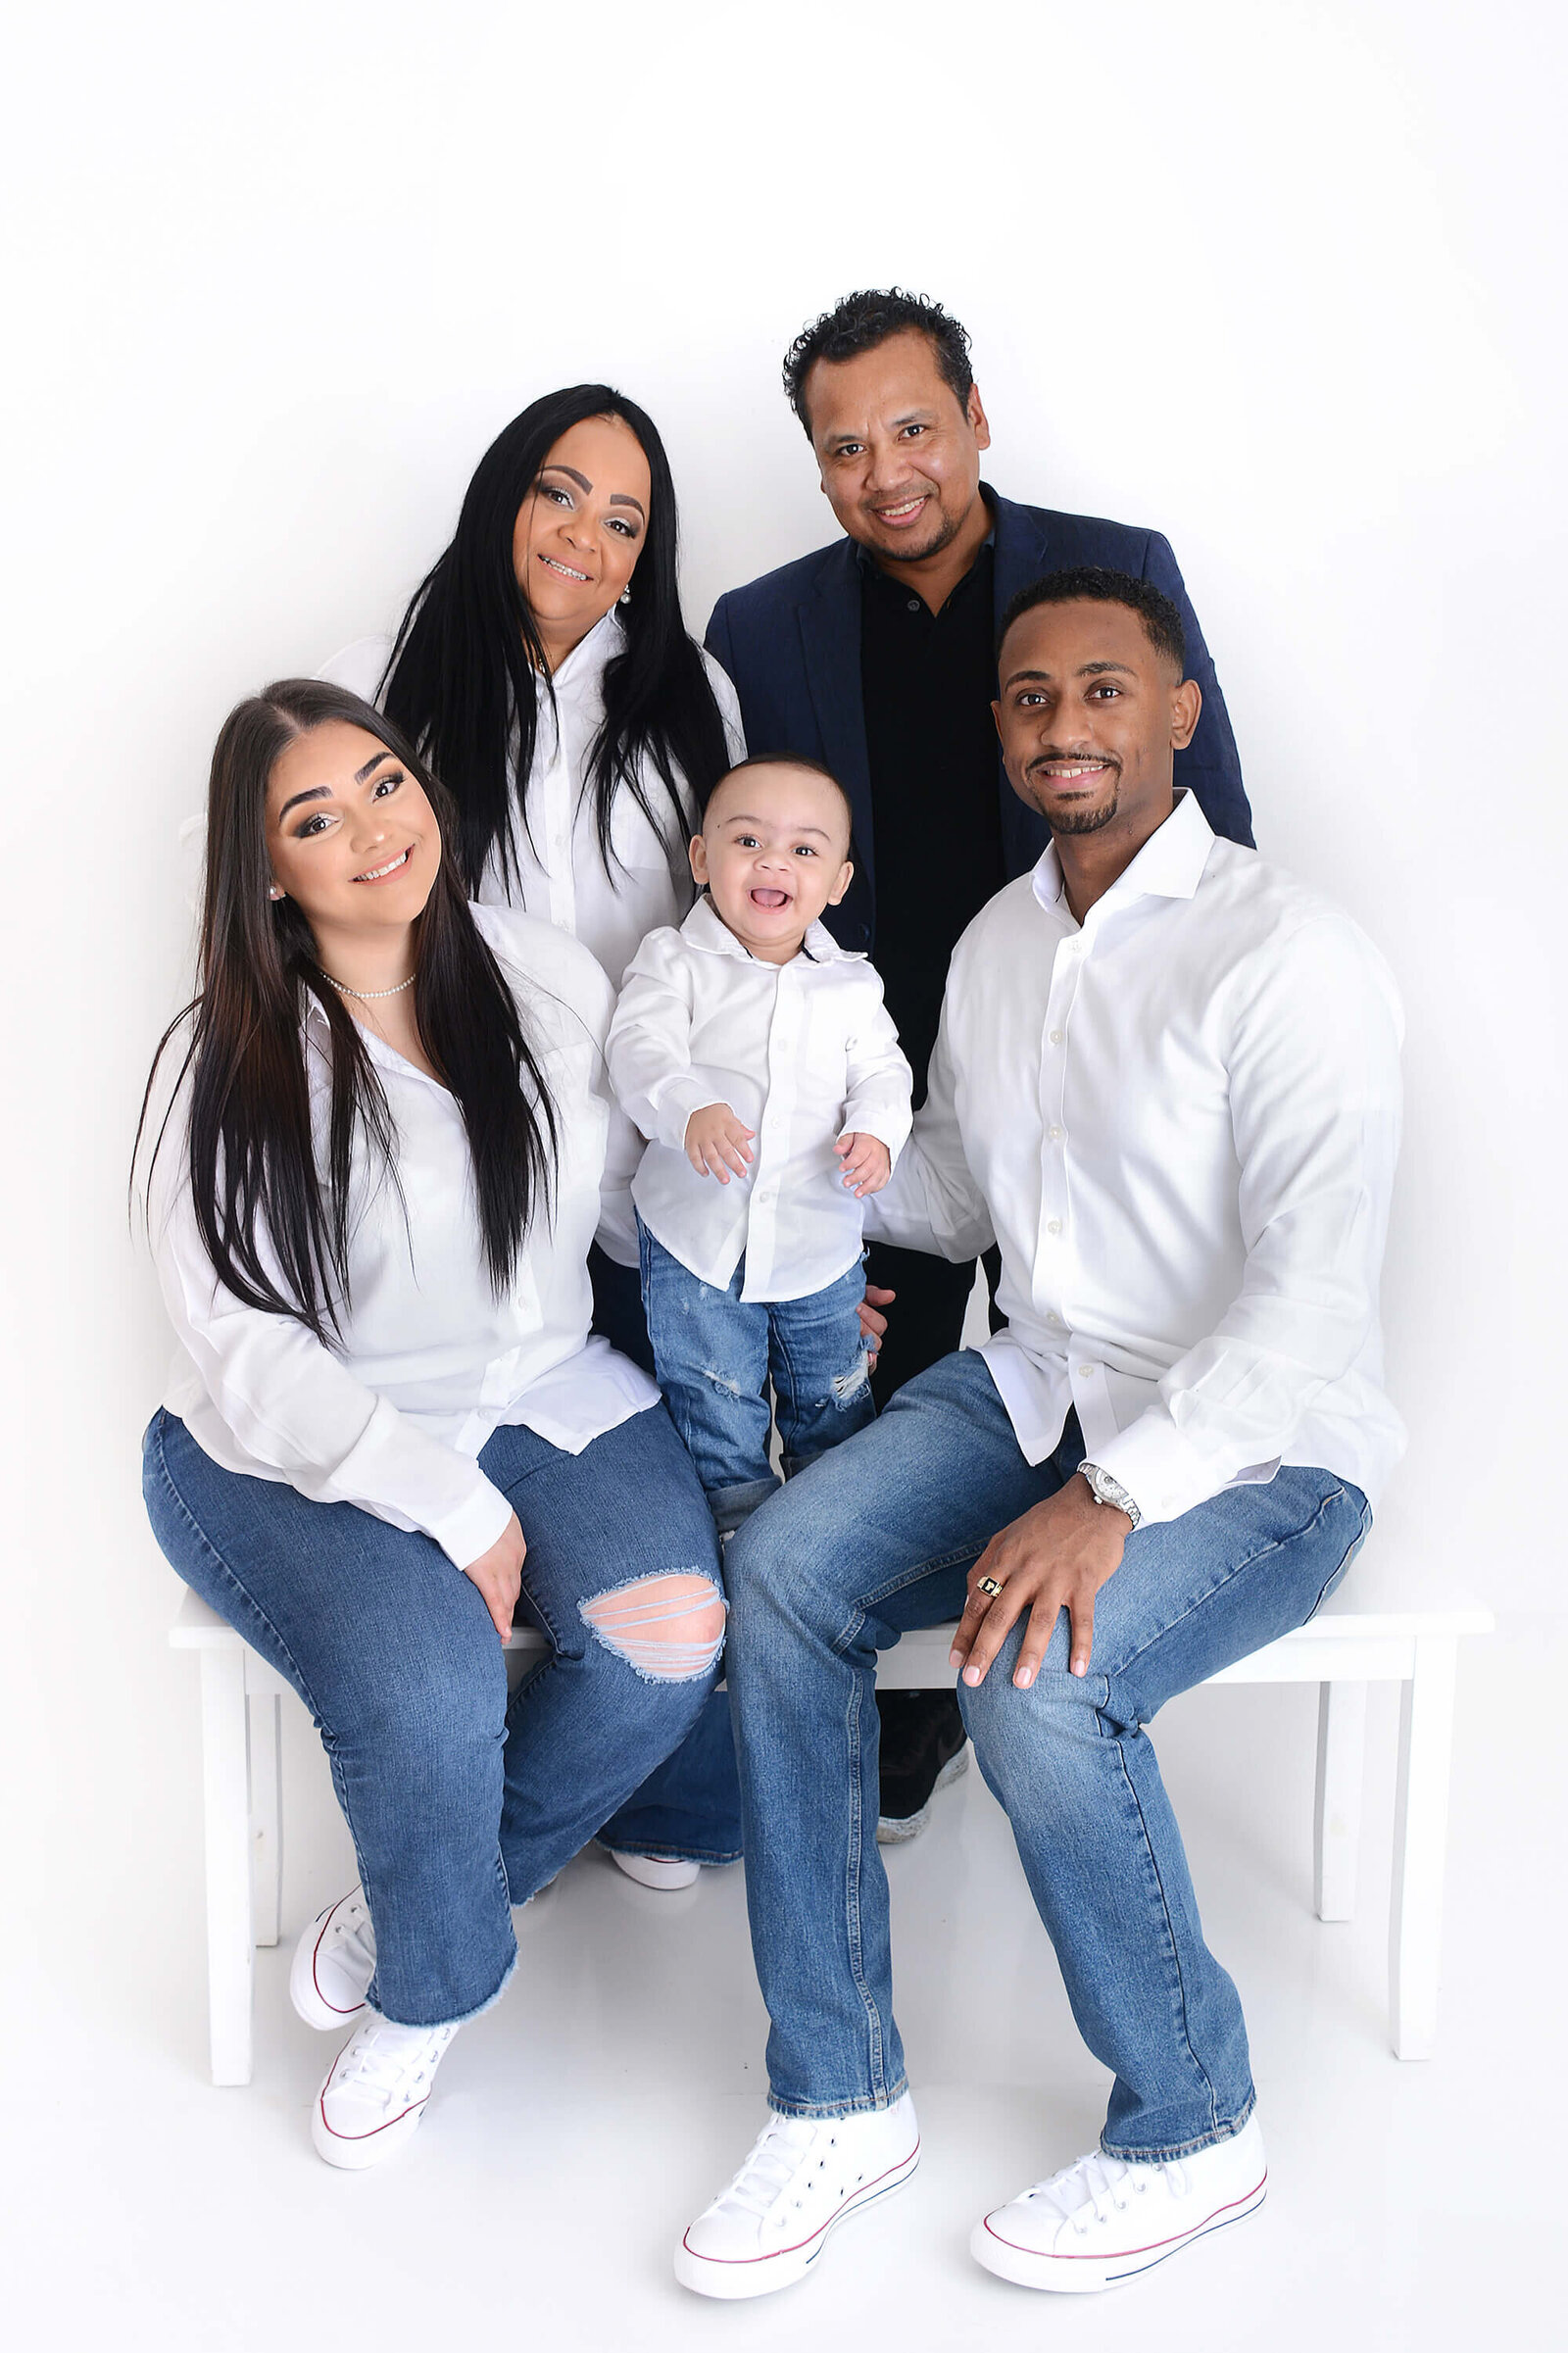 extended family photoshoot all wearing white at a photography studio in houston